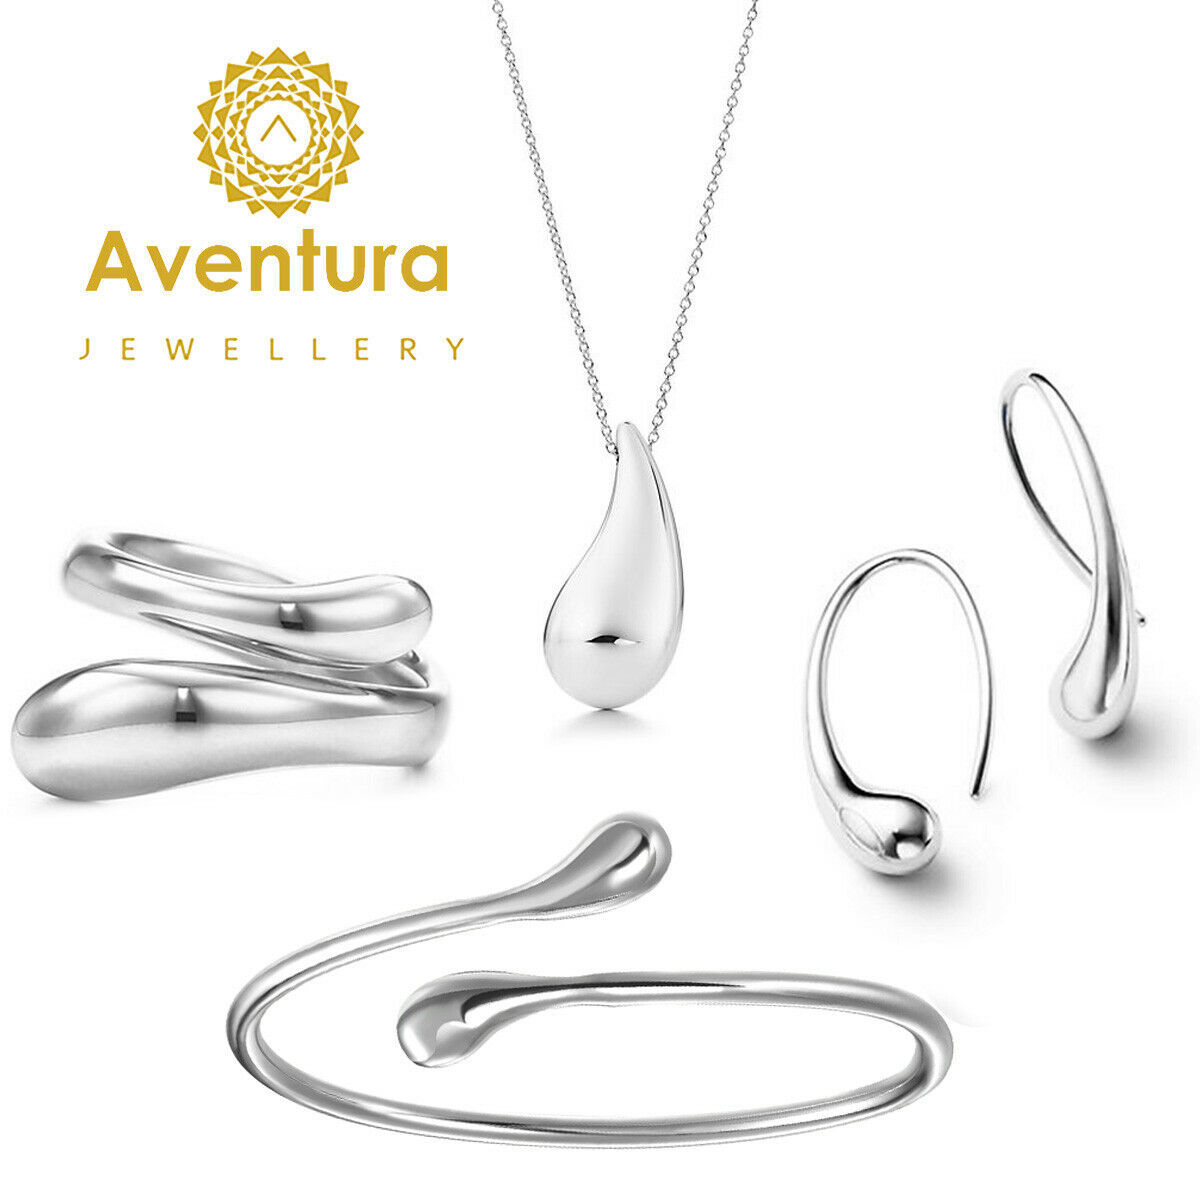 4 Piece Teardrop Bangle Earring Necklace and Ring Set- 18K White Gold ITALY MADE